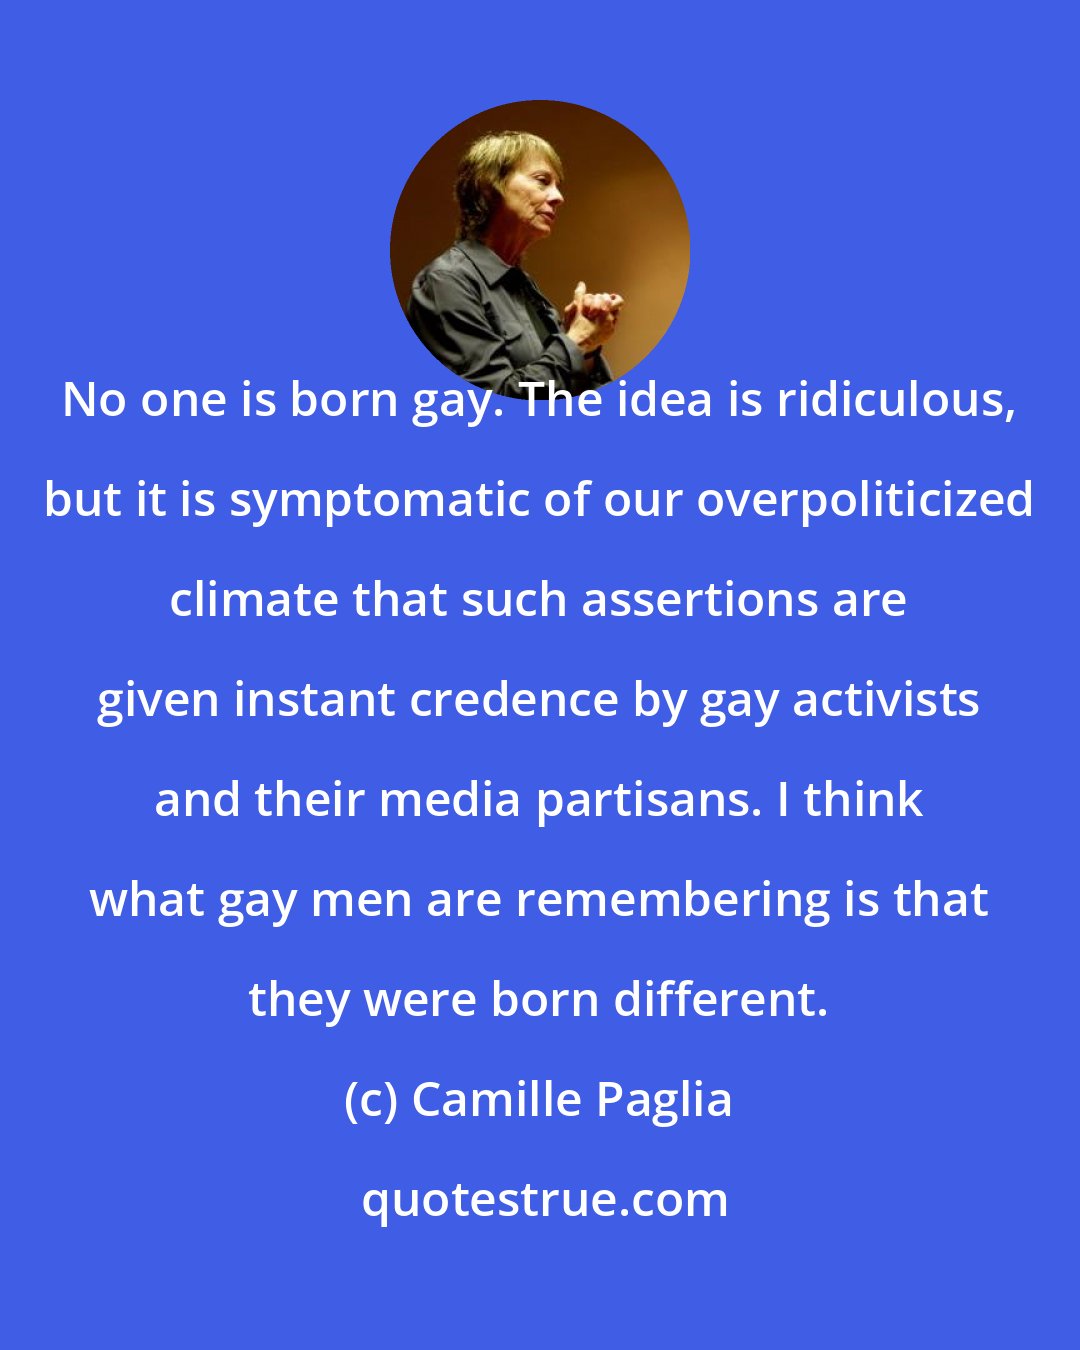 Camille Paglia: No one is born gay. The idea is ridiculous, but it is symptomatic of our overpoliticized climate that such assertions are given instant credence by gay activists and their media partisans. I think what gay men are remembering is that they were born different.